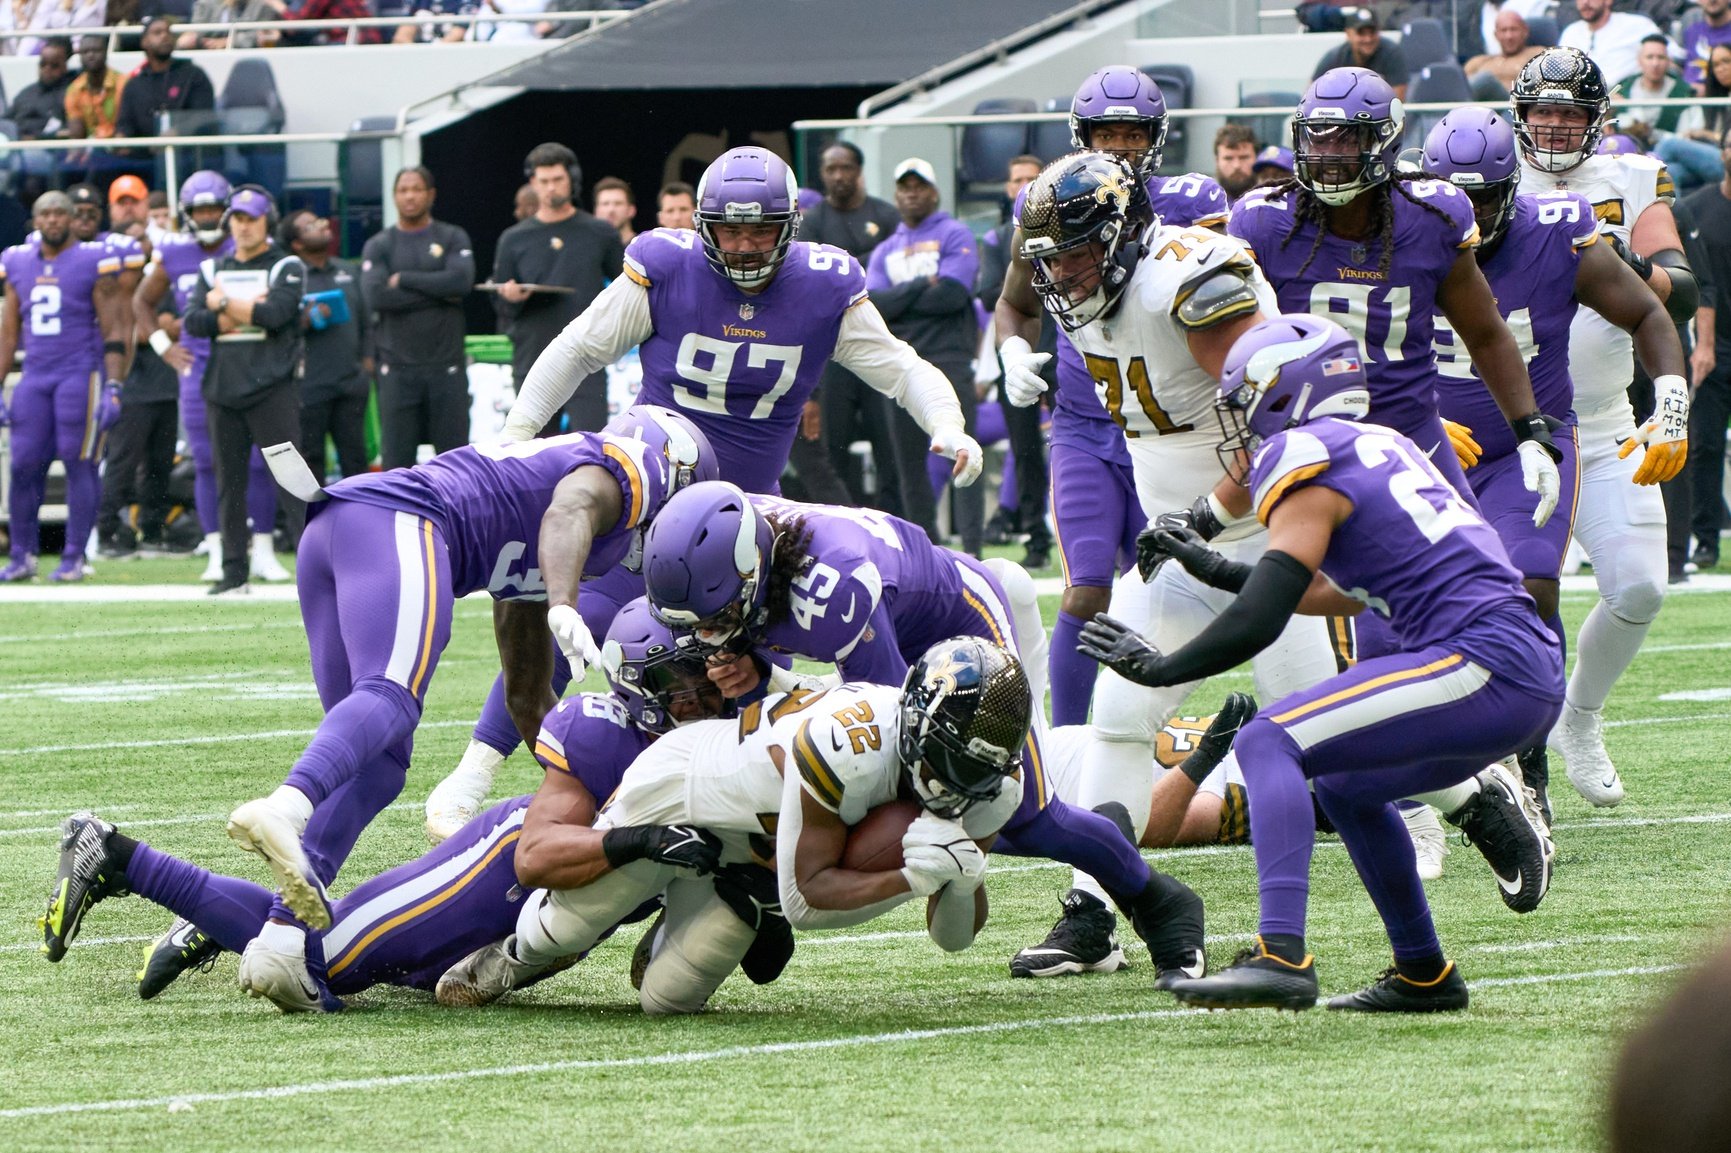 Saints will play Vikings in London in Week 4 - Canal Street Chronicles